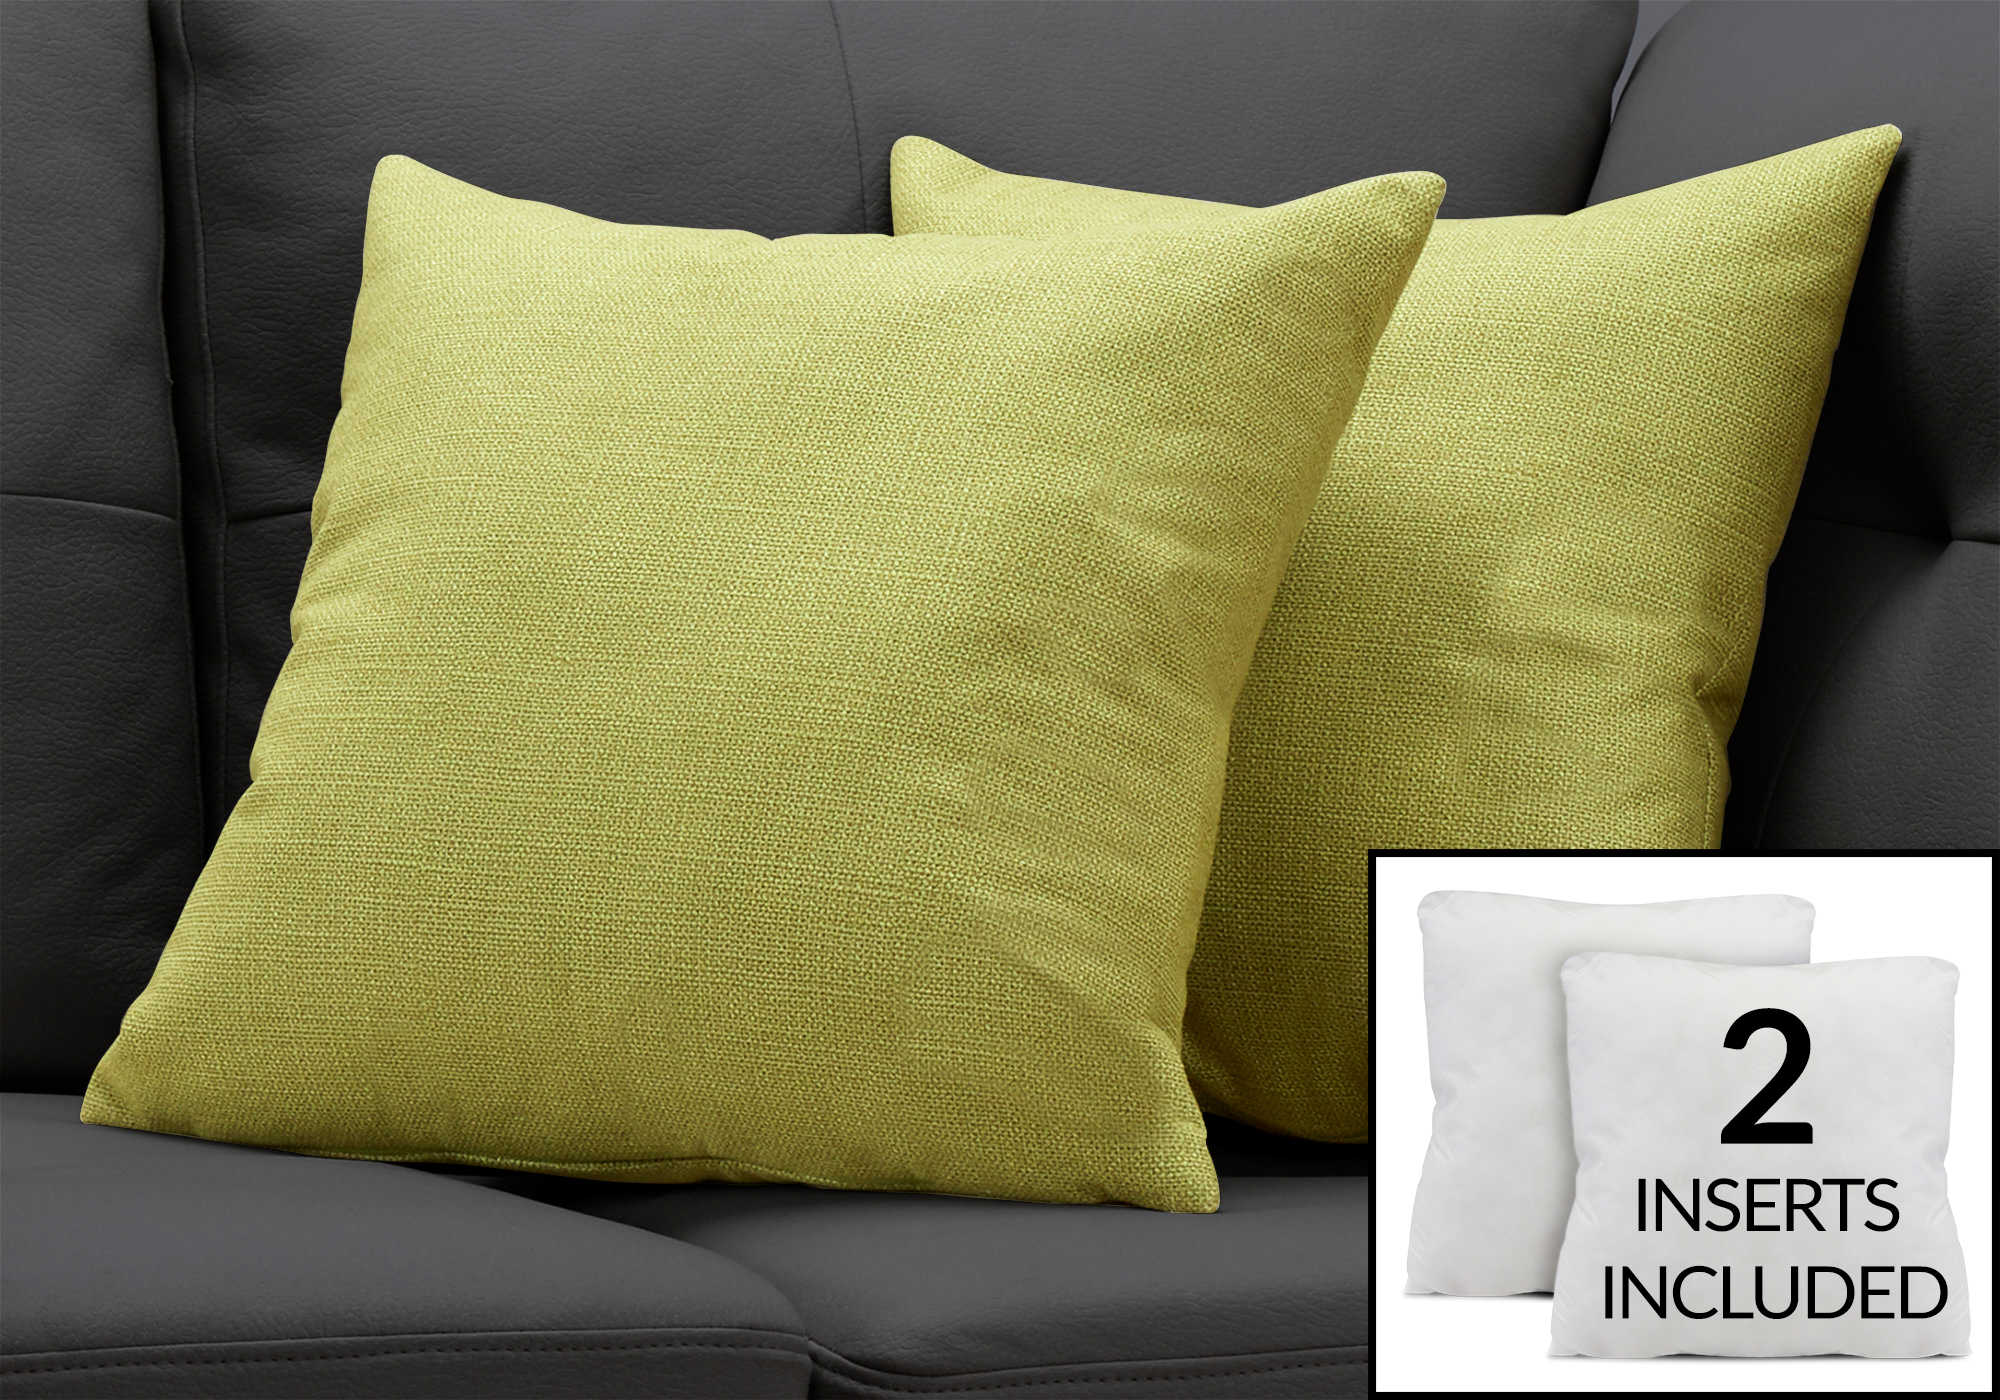 BEDROOM DECORATIVE PILLOW - 18"X 18" / PATTERNED LIME GREEN / 2PCS